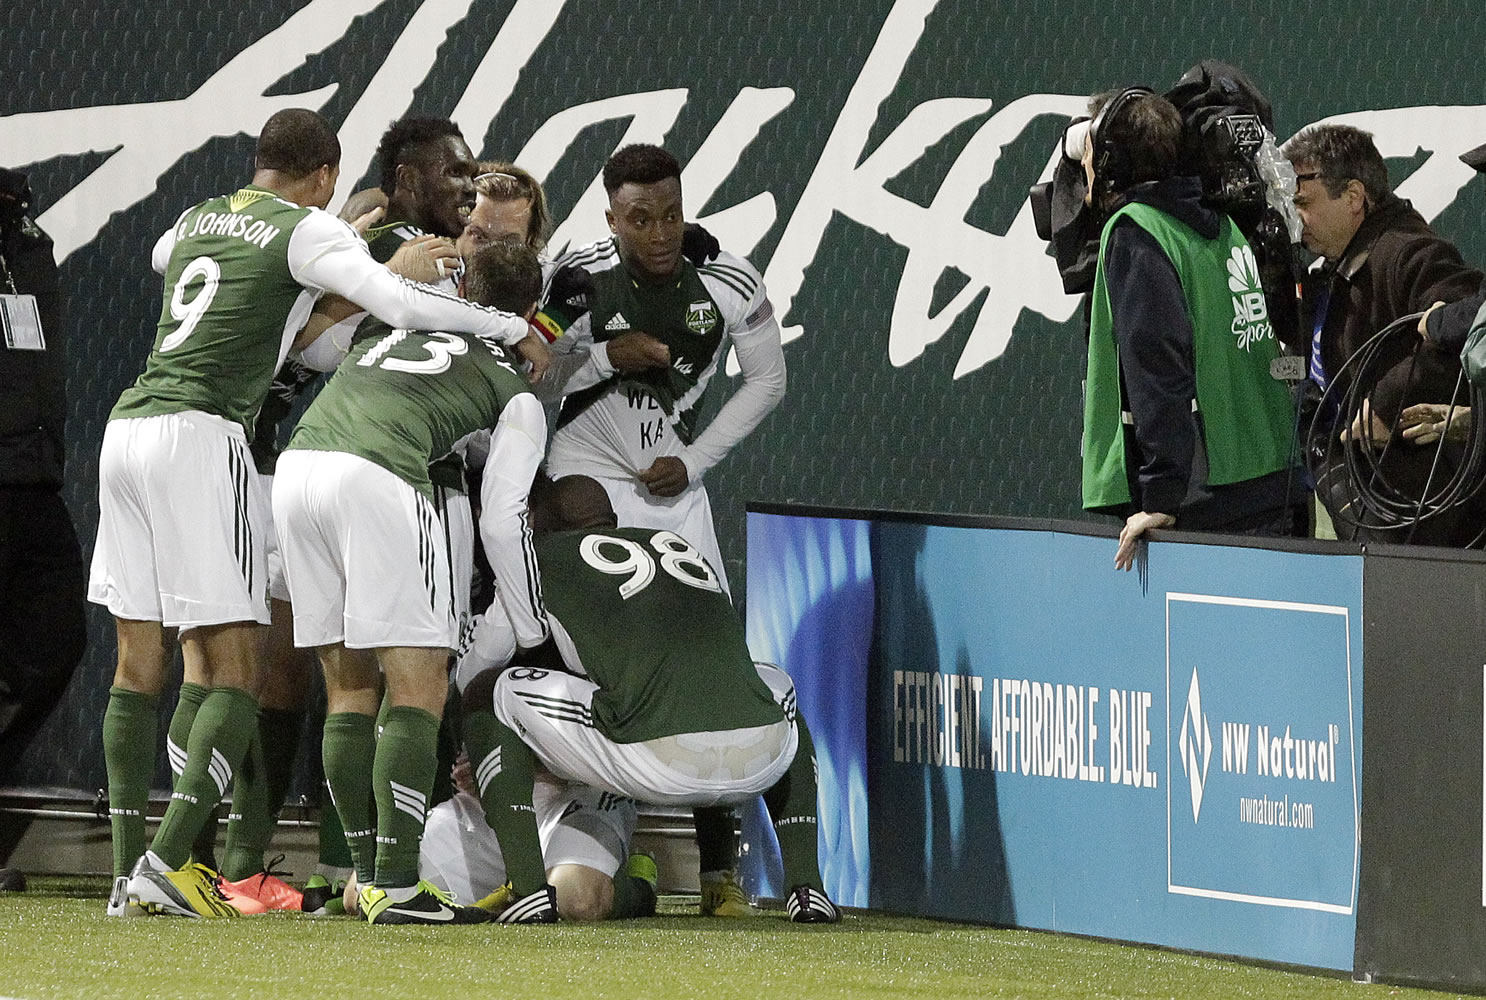 Portland Timbers players pose for the television camera at right as they celebrate scoring on Will Johnson's free kick during the second half against the San Jose Earthquake.